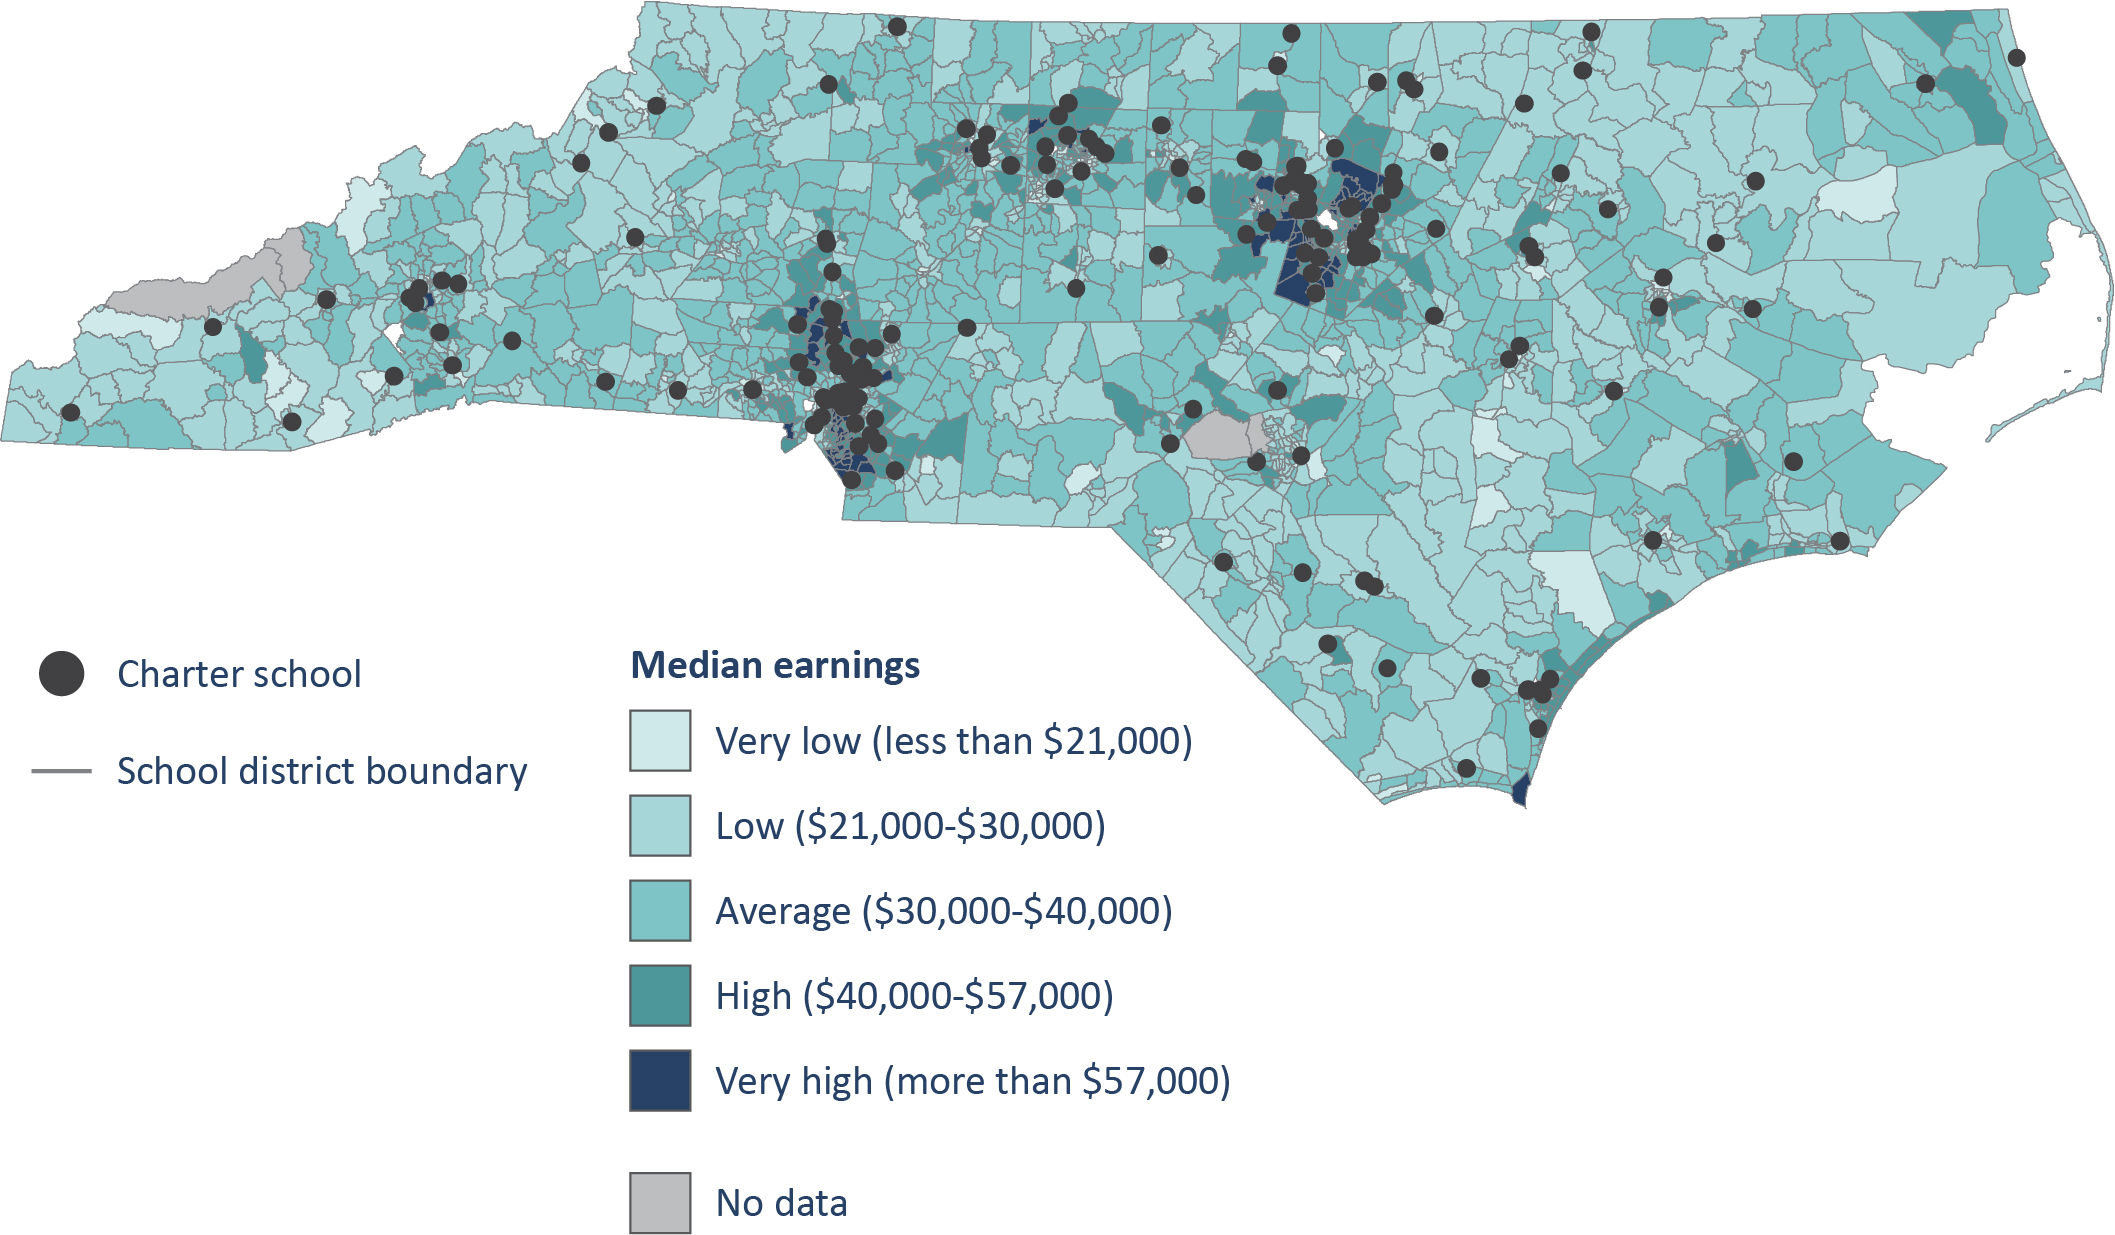 Figure 1. Many charter schools in North Carolina are located in higher-income neighborhoods.